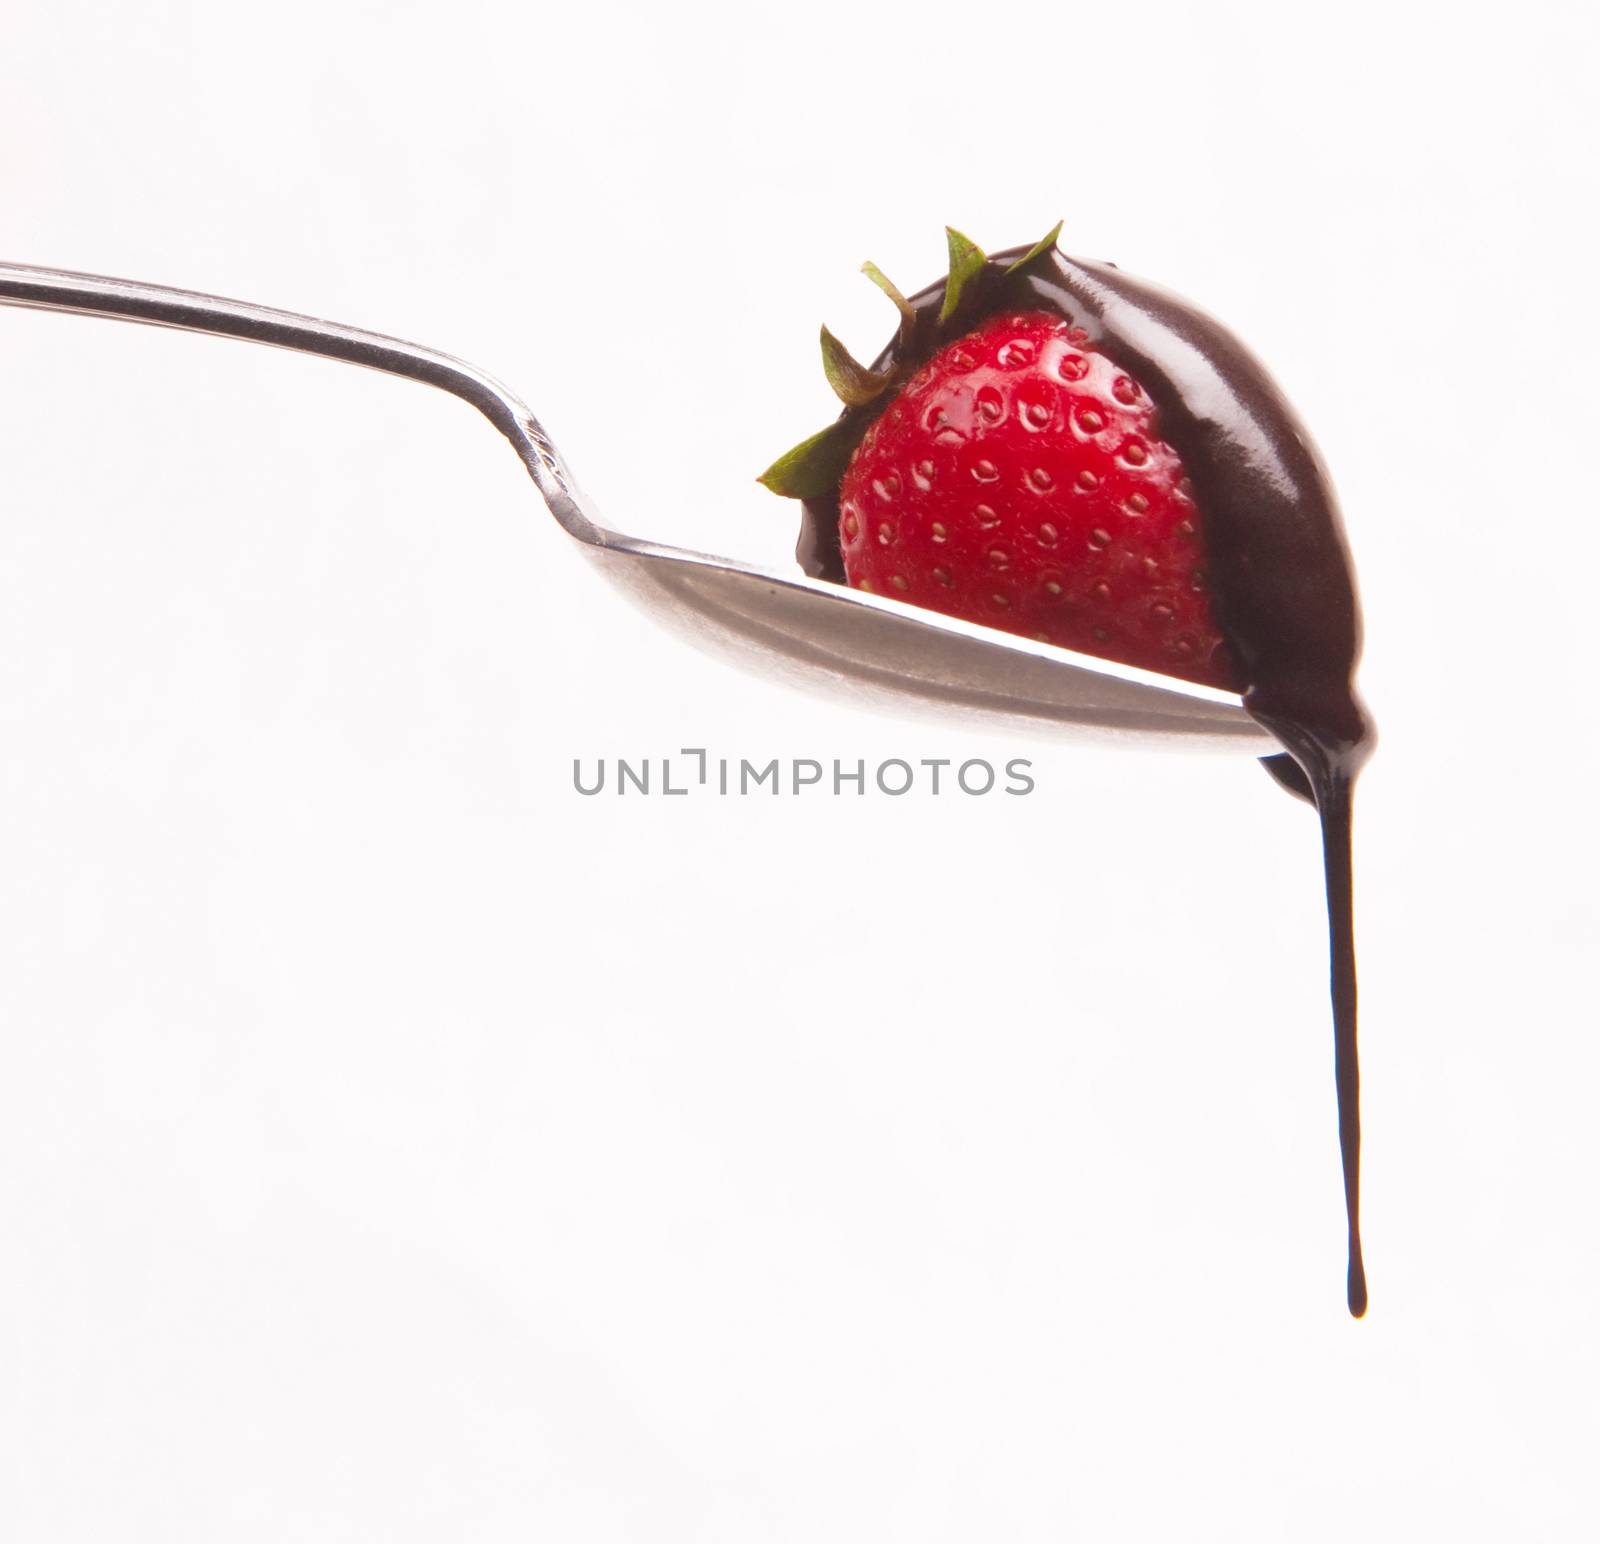 Chocolatte Drips of the Raw Food Red Strawberry Sitting on Spoon by ChrisBoswell